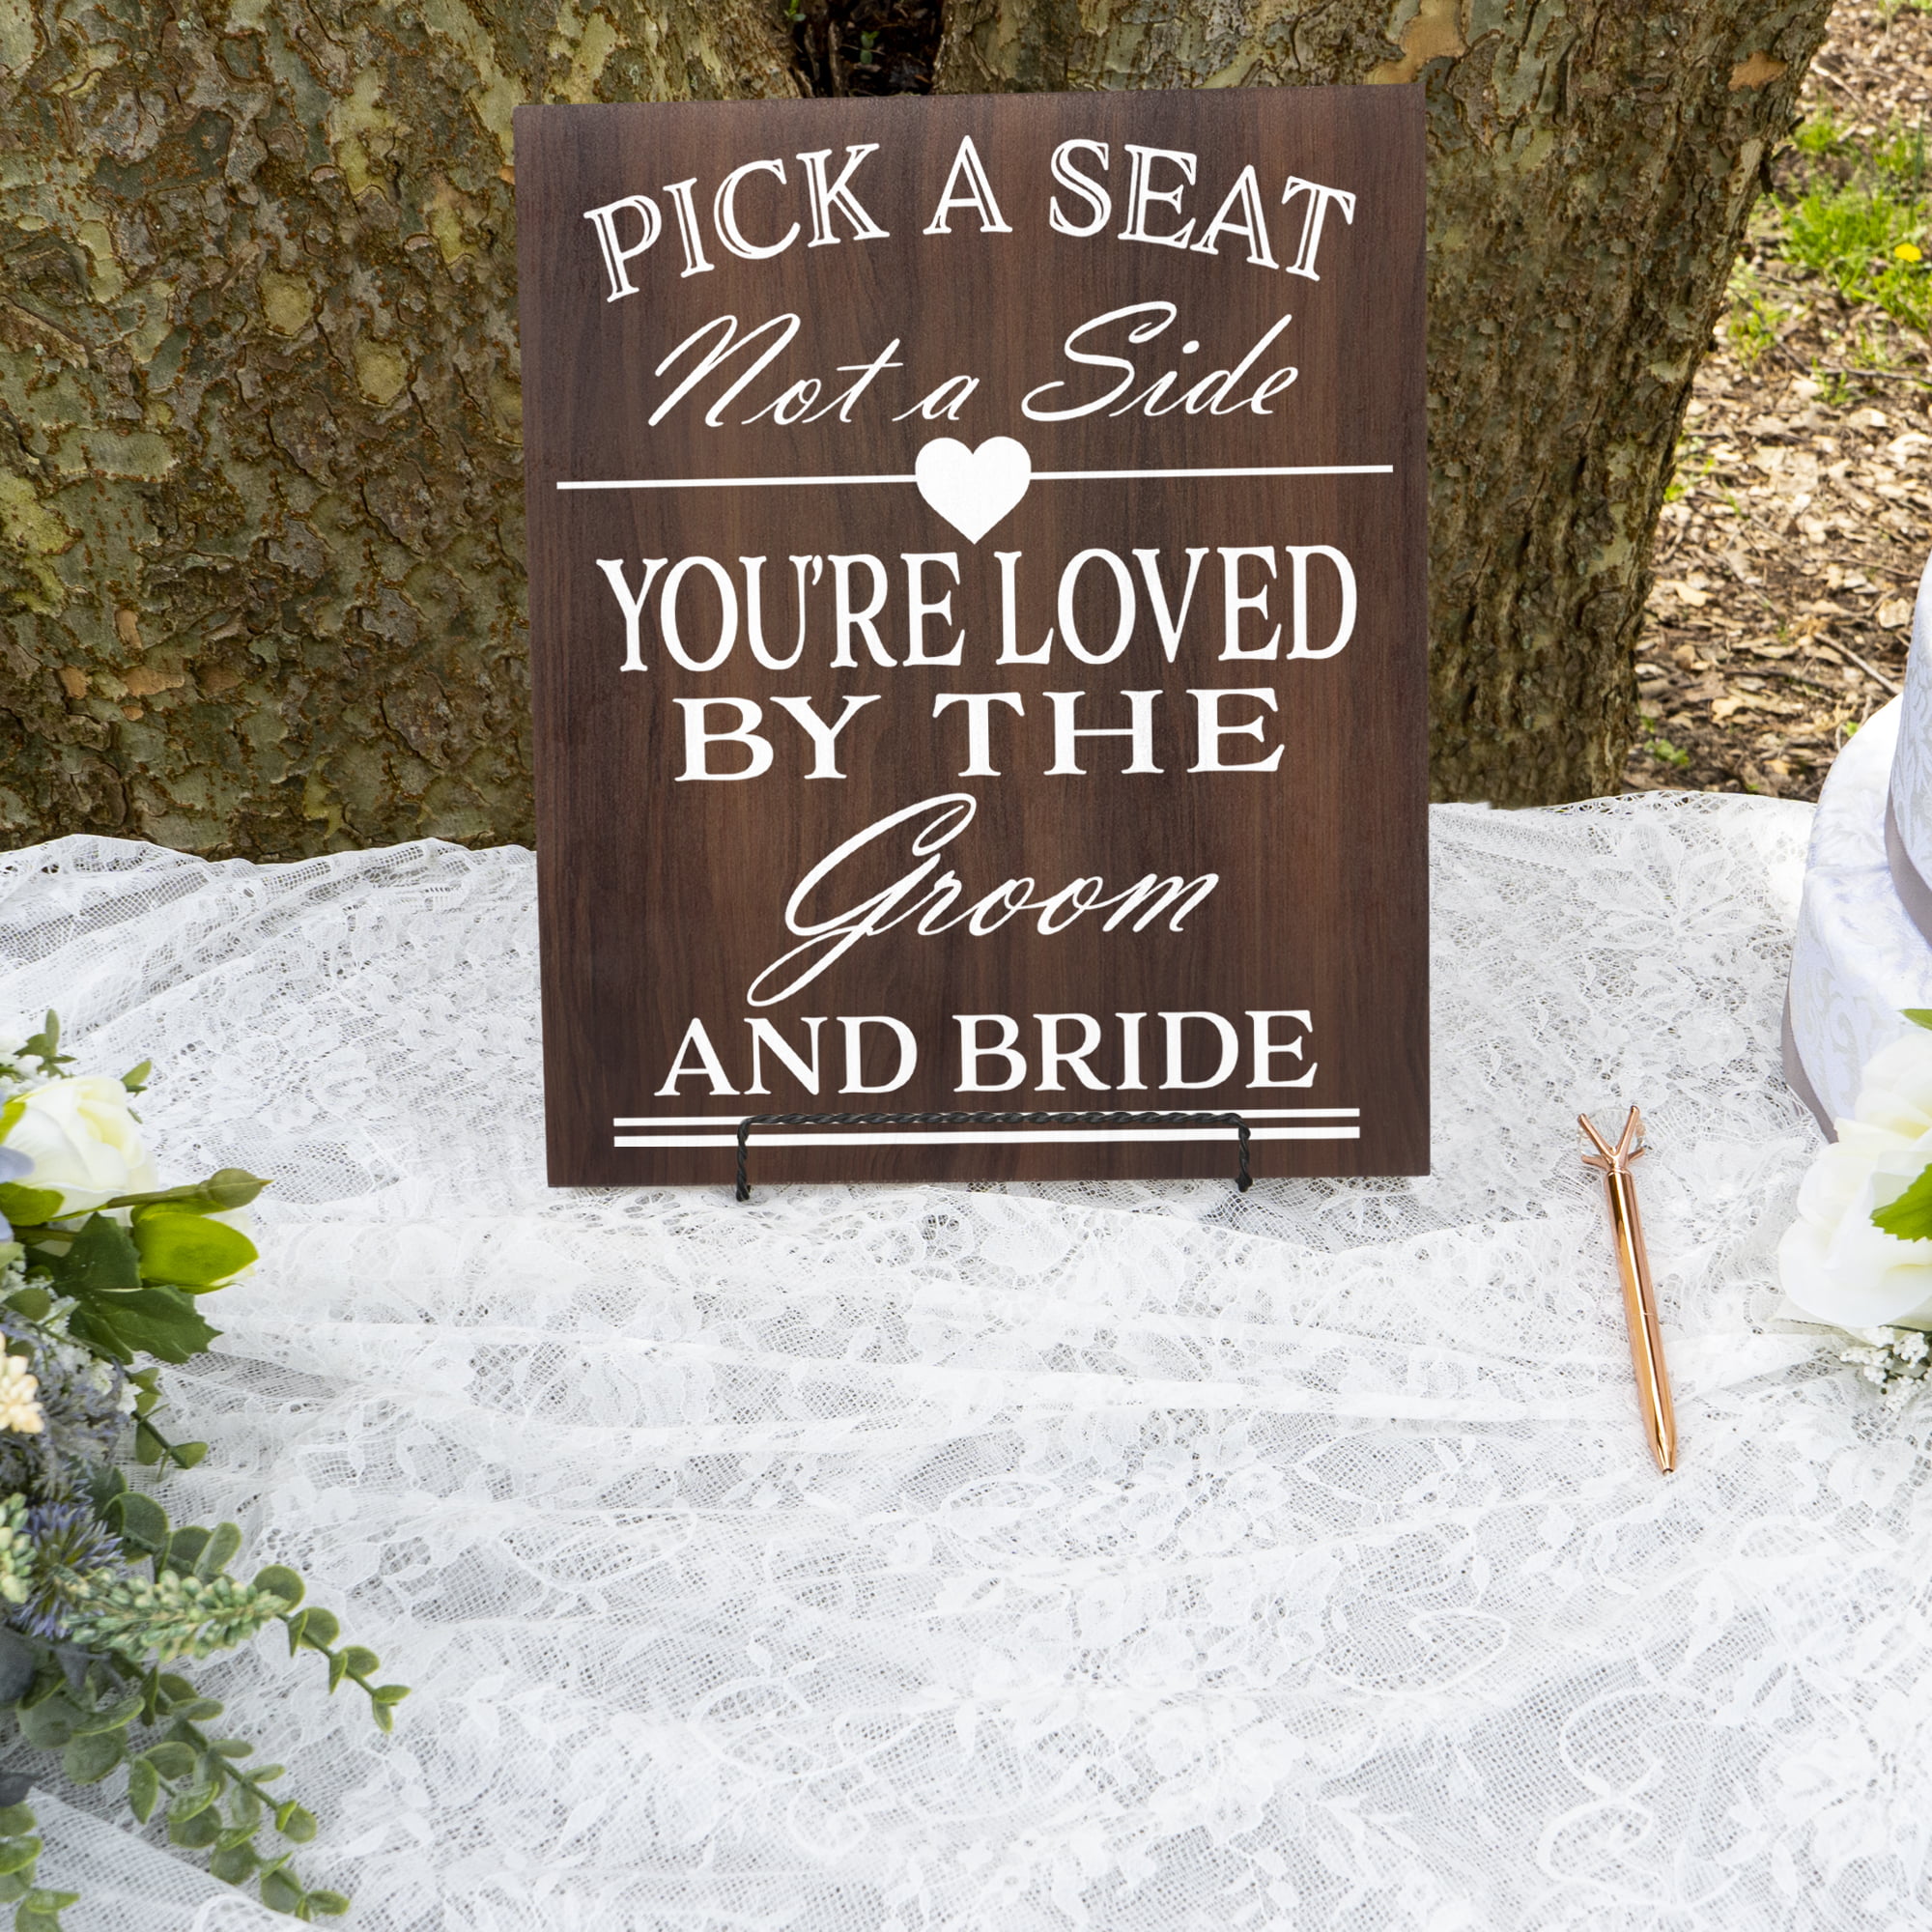 K & J Creates Wedding Signs Decor. Pick a seat, not a side, you're loved  by both the groom and bride. …